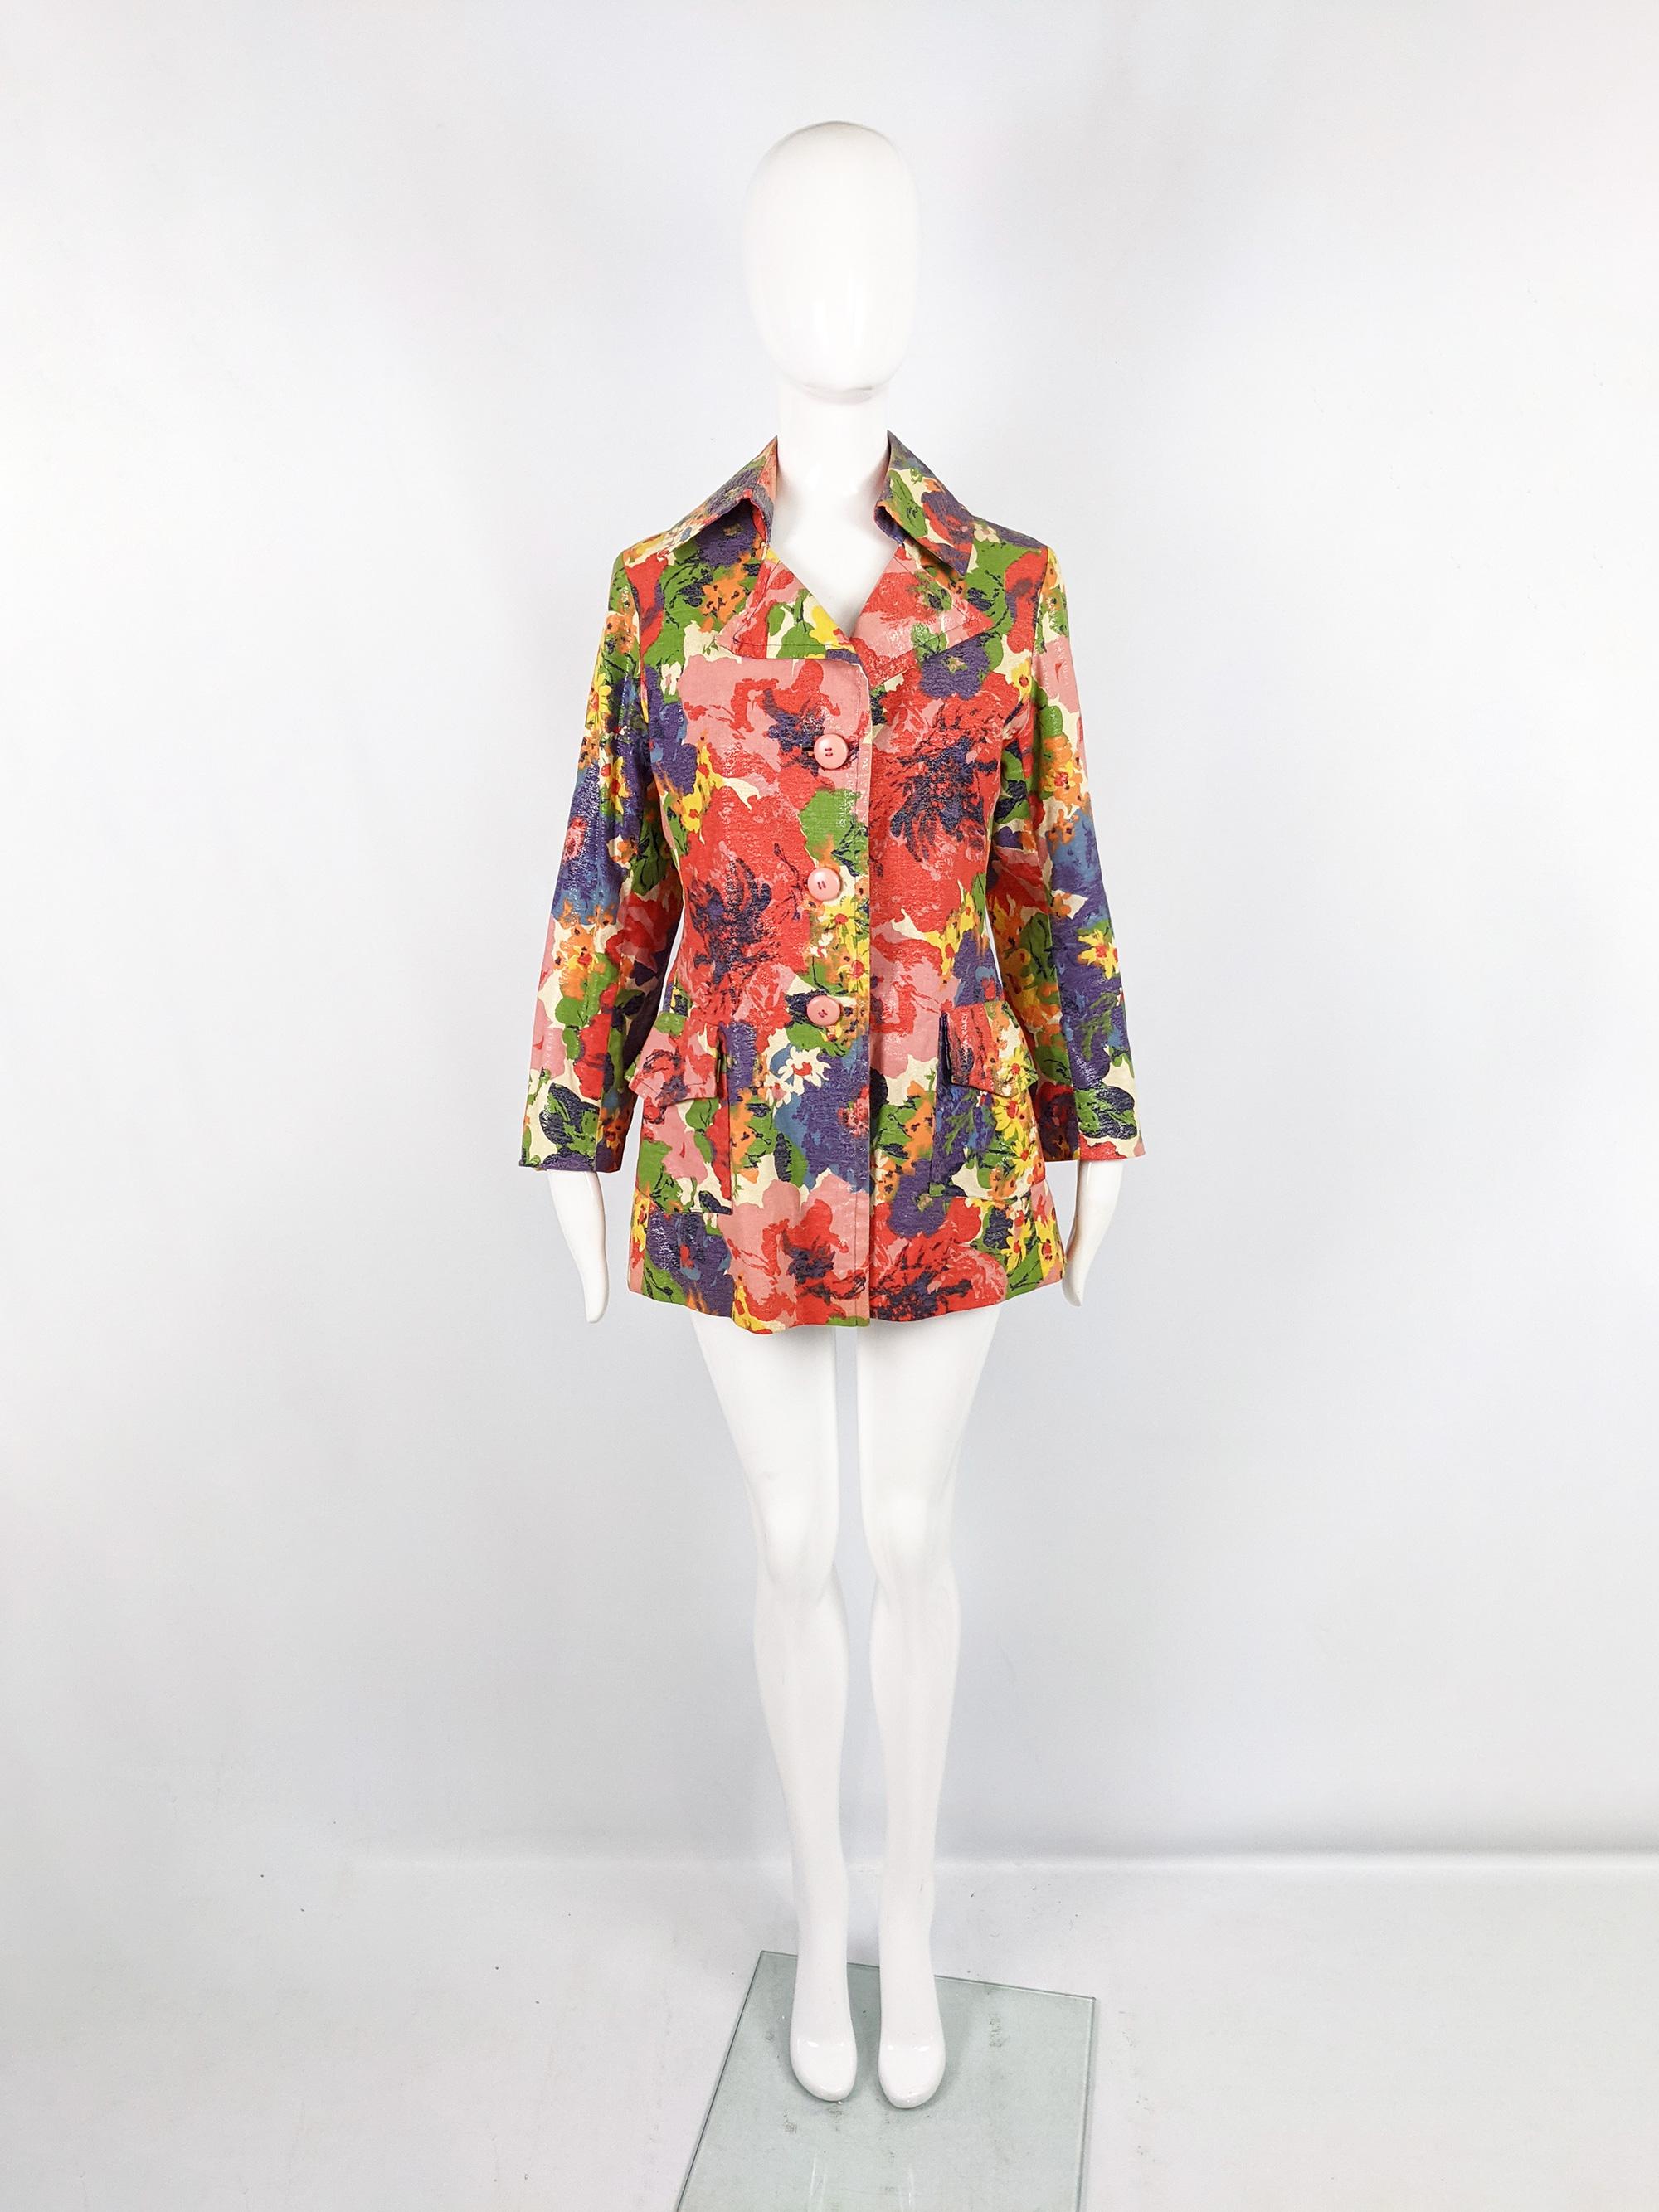 A fabulous vintage womens coat from the 60s by American designer, Marguerite Rubel. In a vibrantly patterned floral cotton, uniquely coated with a shiny effect throughout. Perfect for spring and summer. 

Size: Unlabelled; fits roughly like a modern